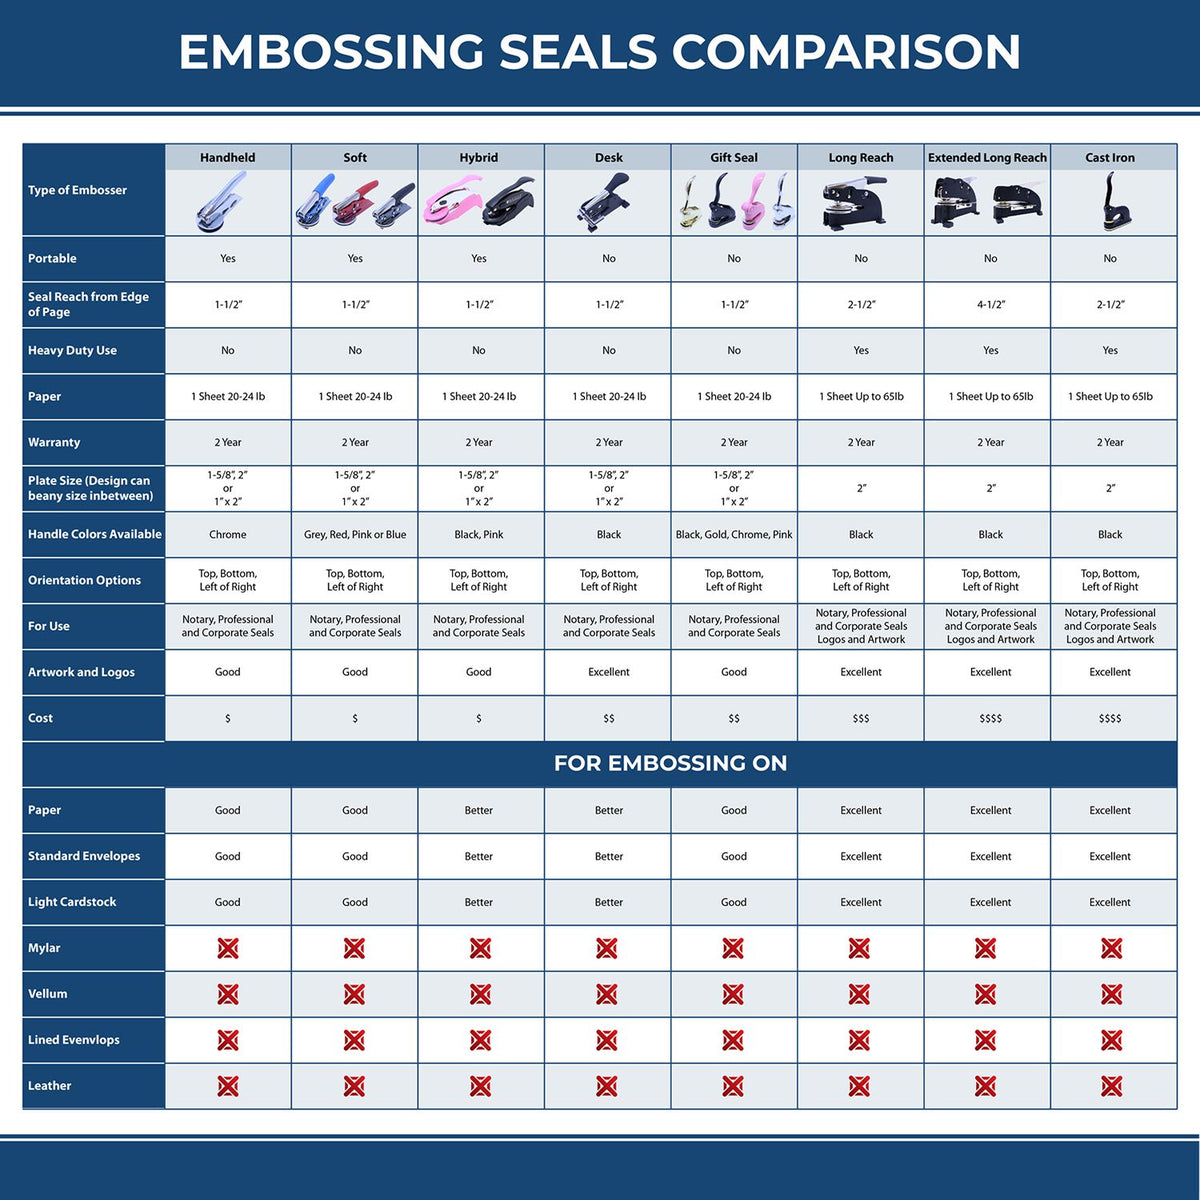 A comparison chart for the different types of mount models available for the Extended Long Reach Nevada Surveyor Embosser.